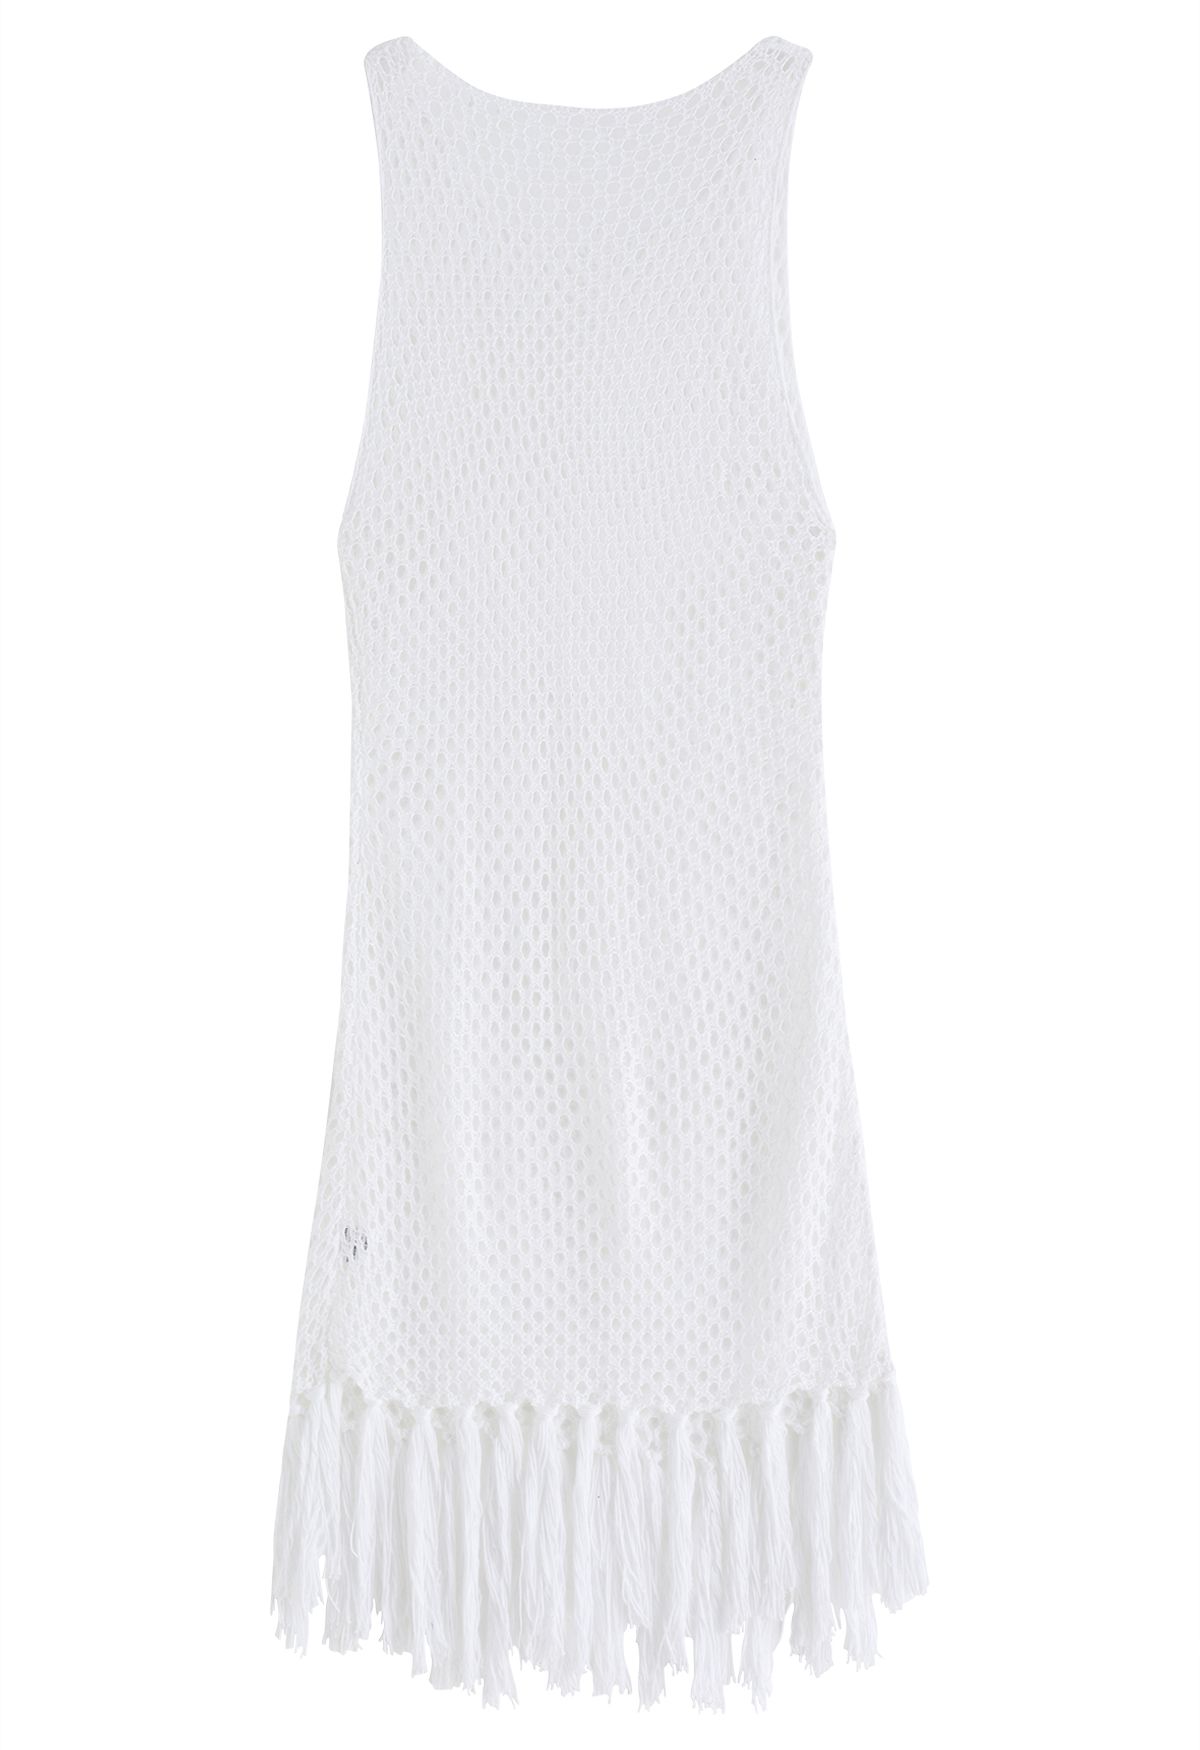 Tassel Hem Hollow Out Sleeveless Knit Cover Up in White